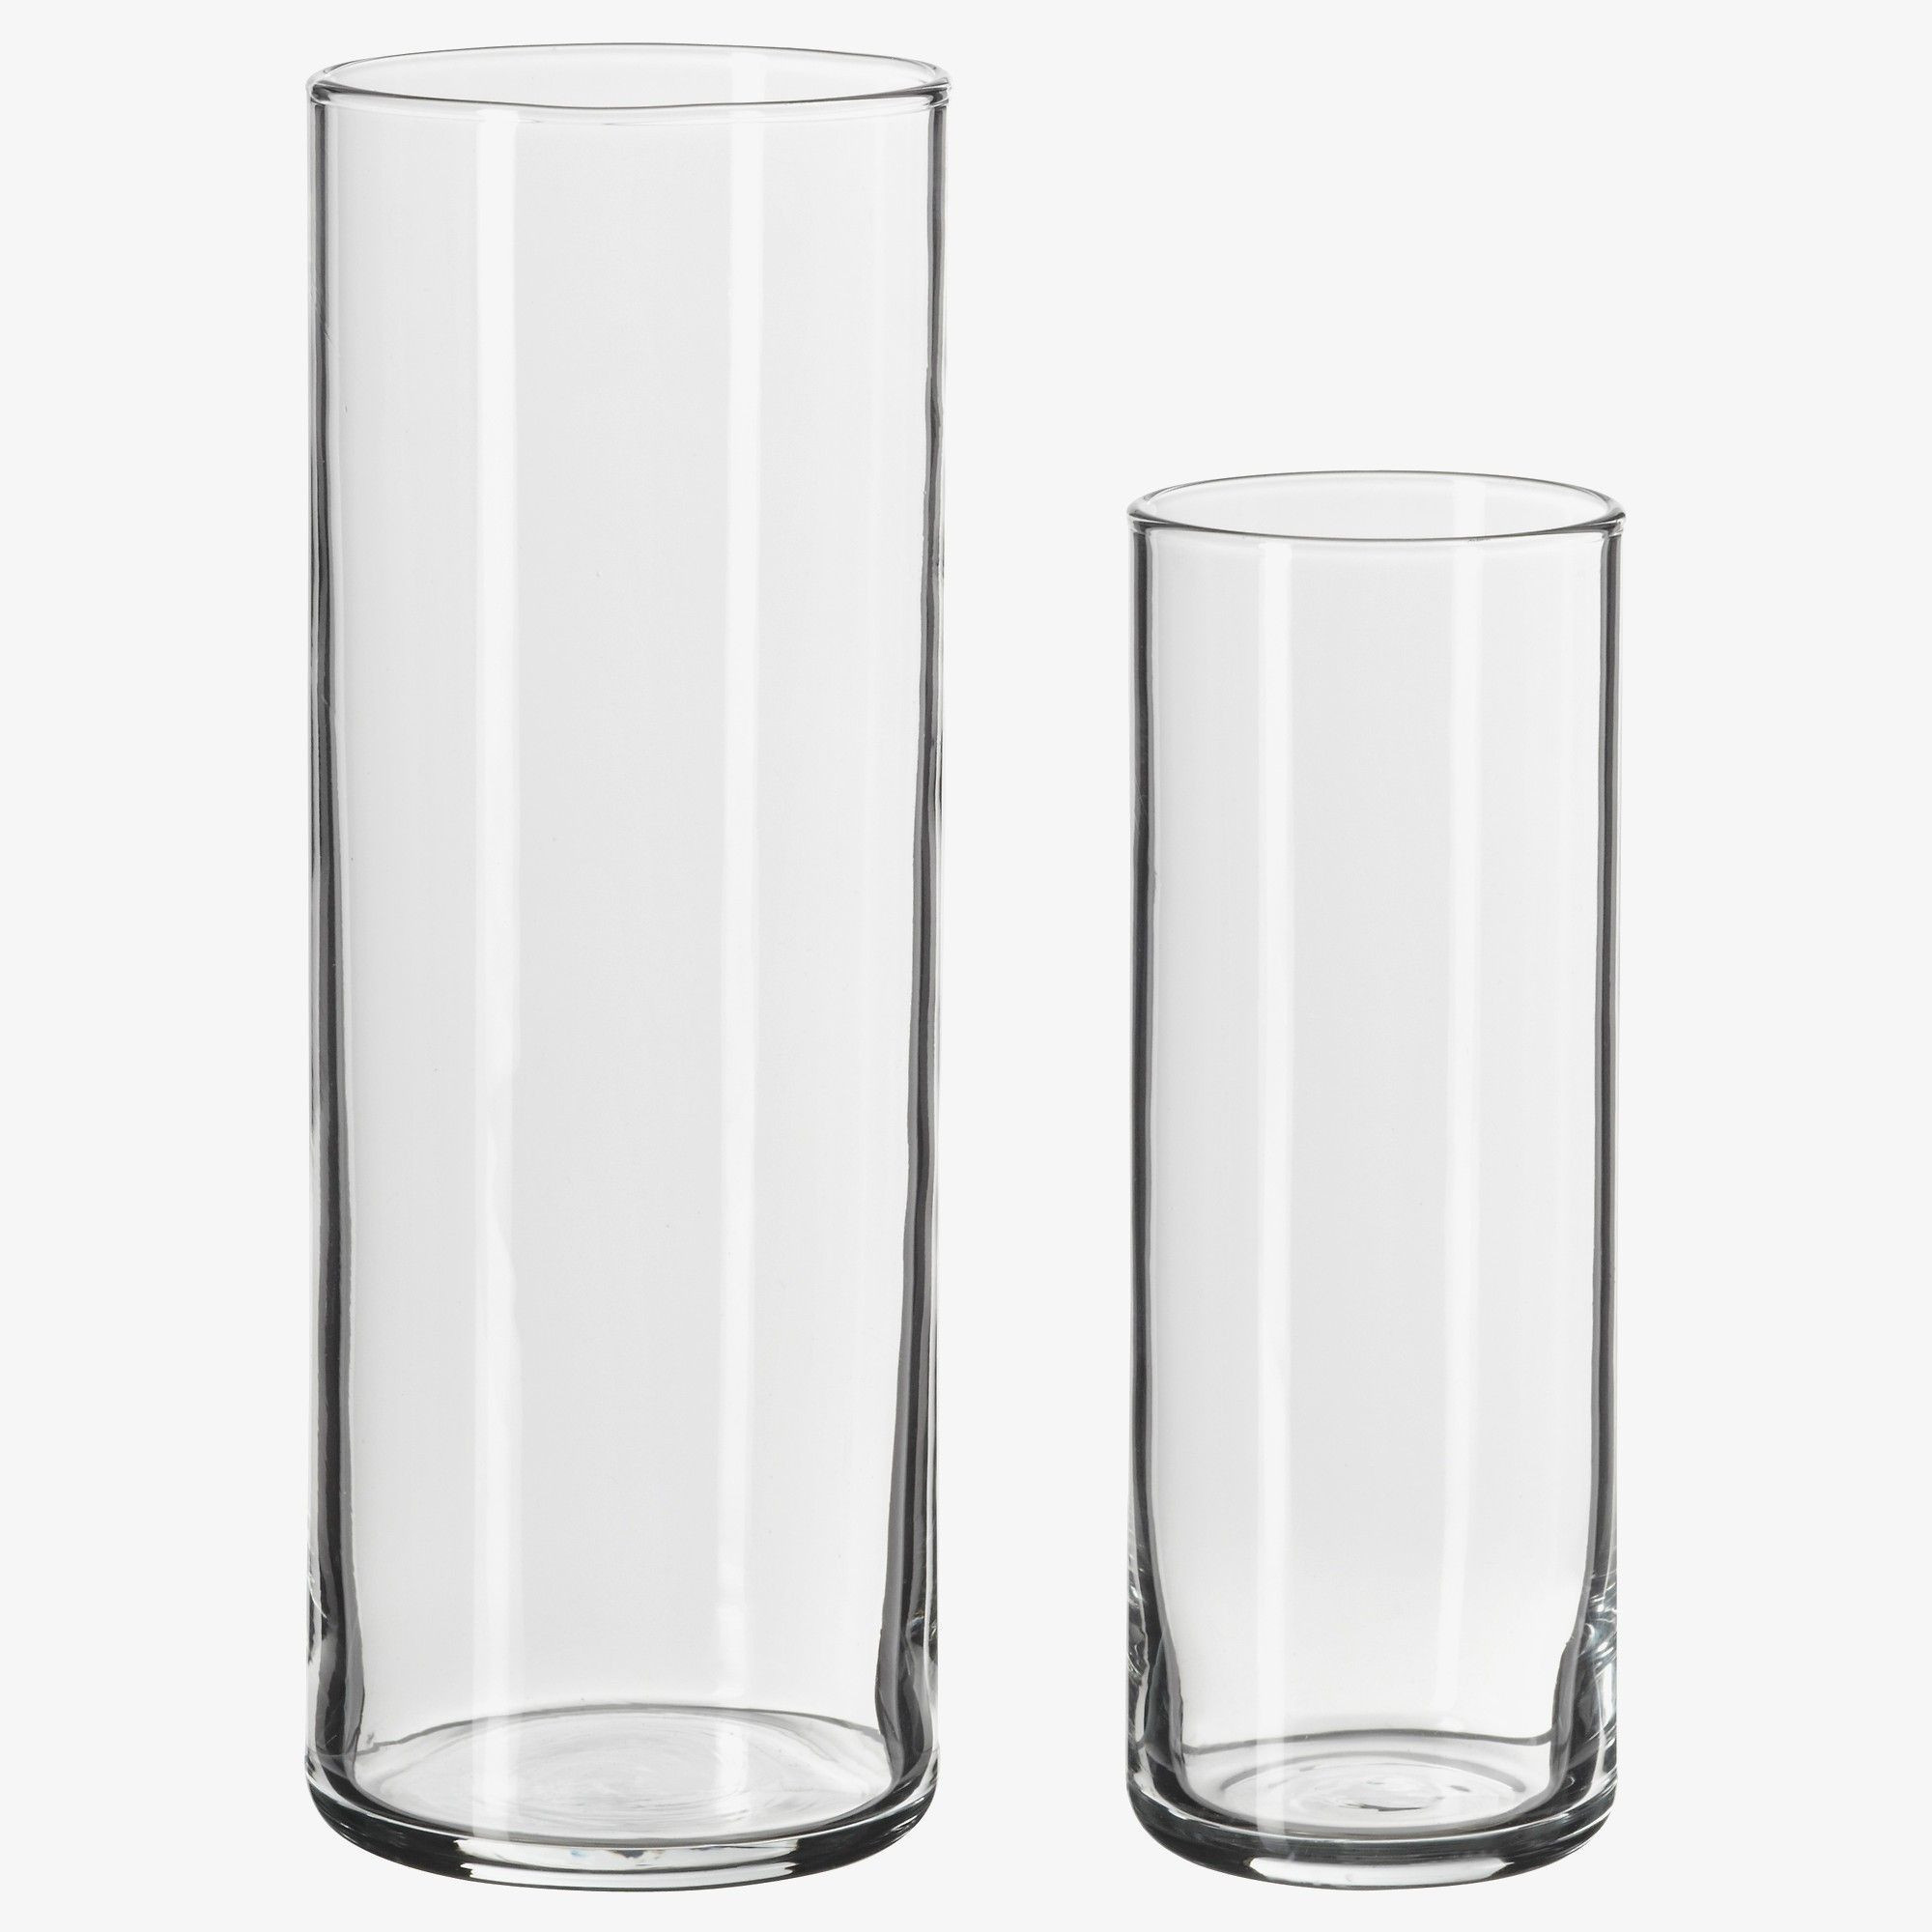 20 Fantastic Clear Acrylic Cylinder Vase 2024 free download clear acrylic cylinder vase of 50 glass pedestal vase the weekly world throughout clear glass tv stand charming new design ikea mantel great pe s5h